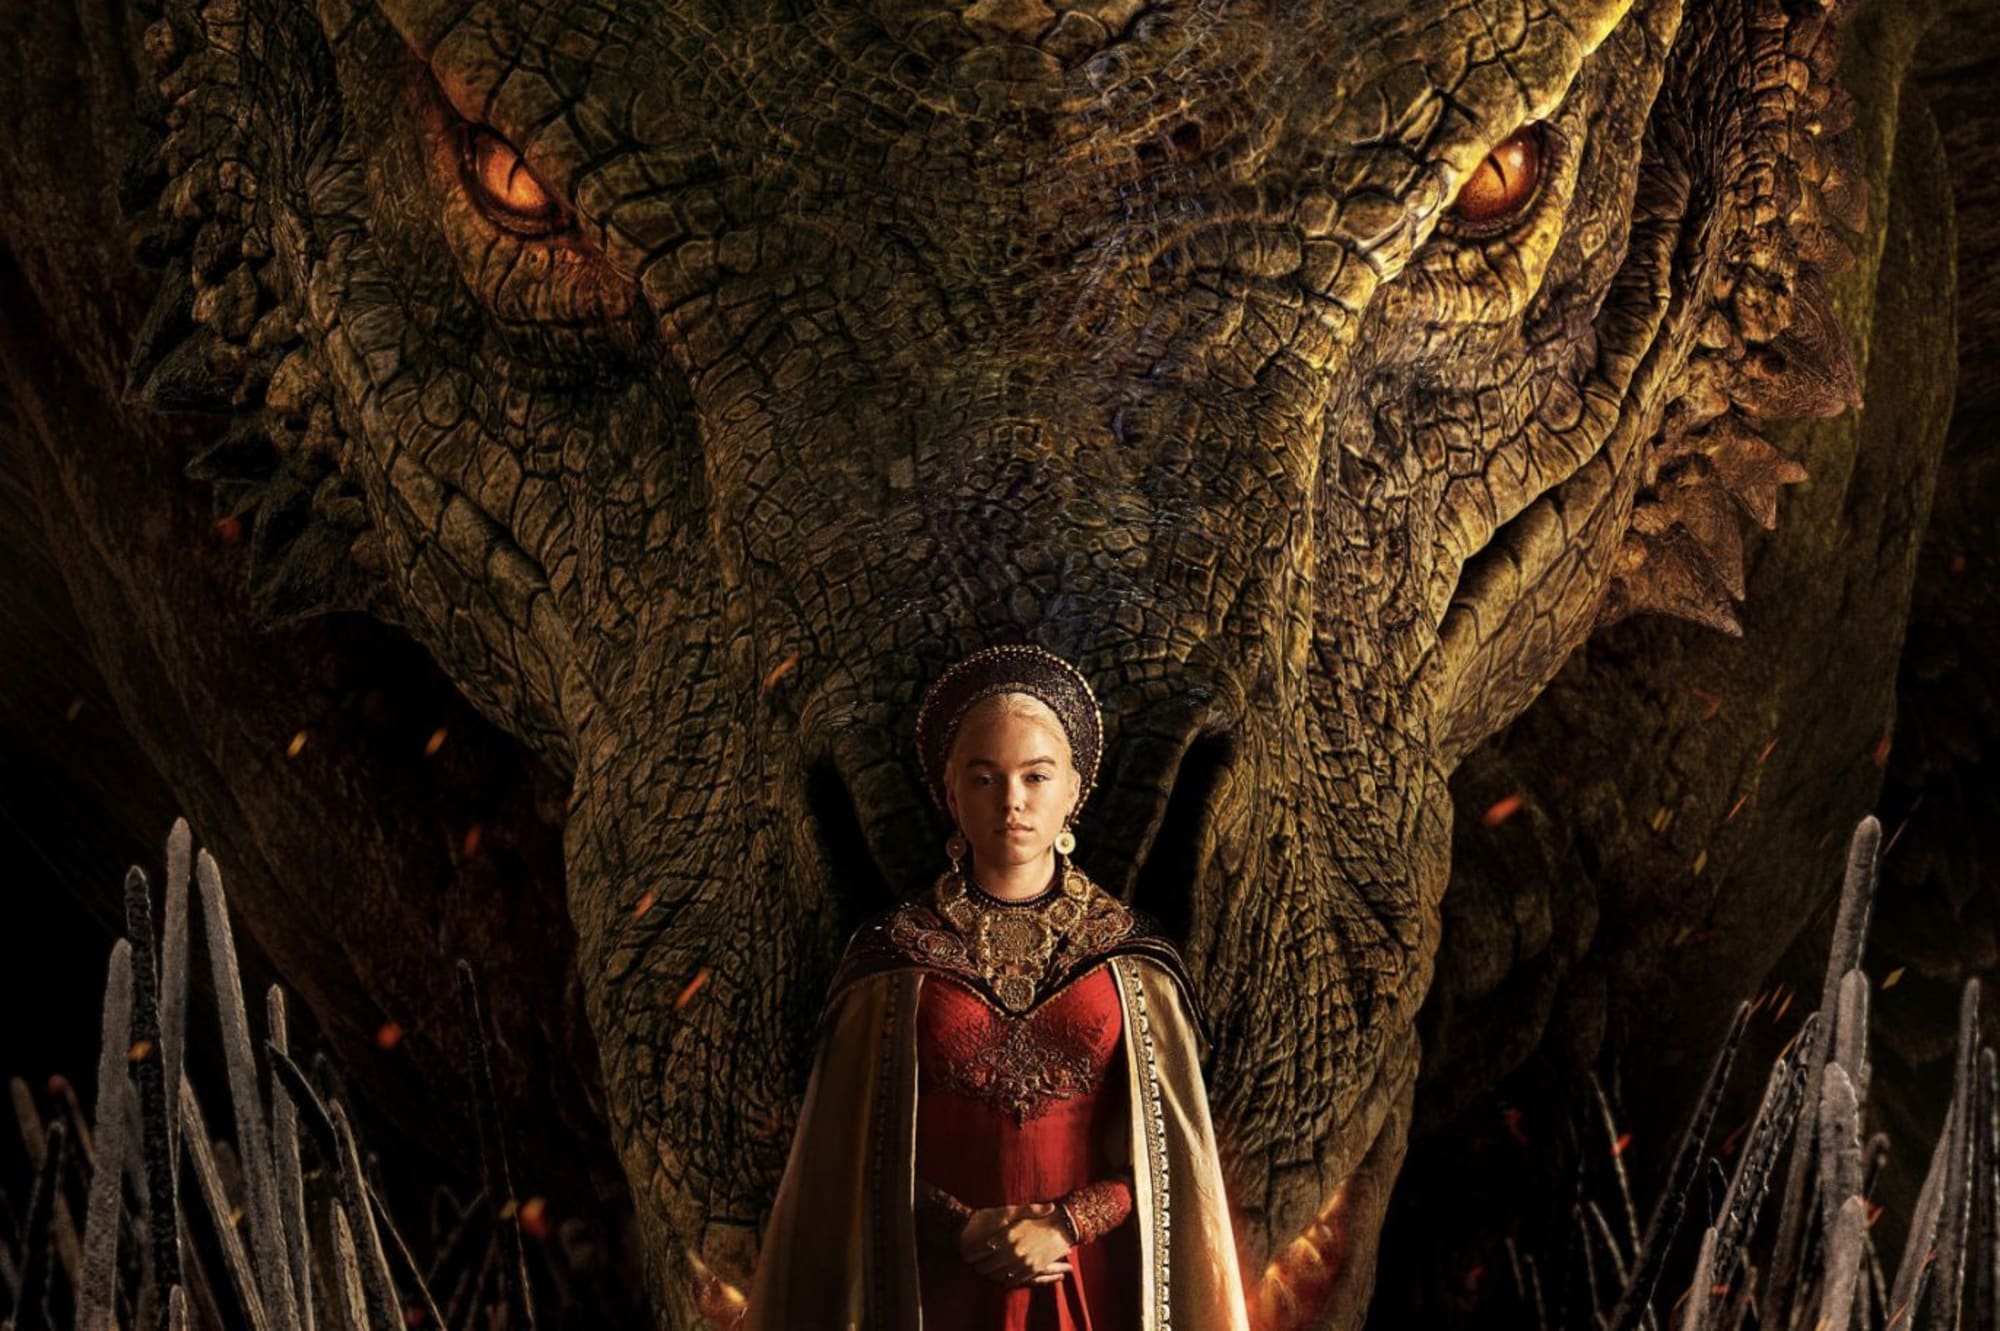 Meet the Cast of Max's 'House of the Dragon' - PureWow